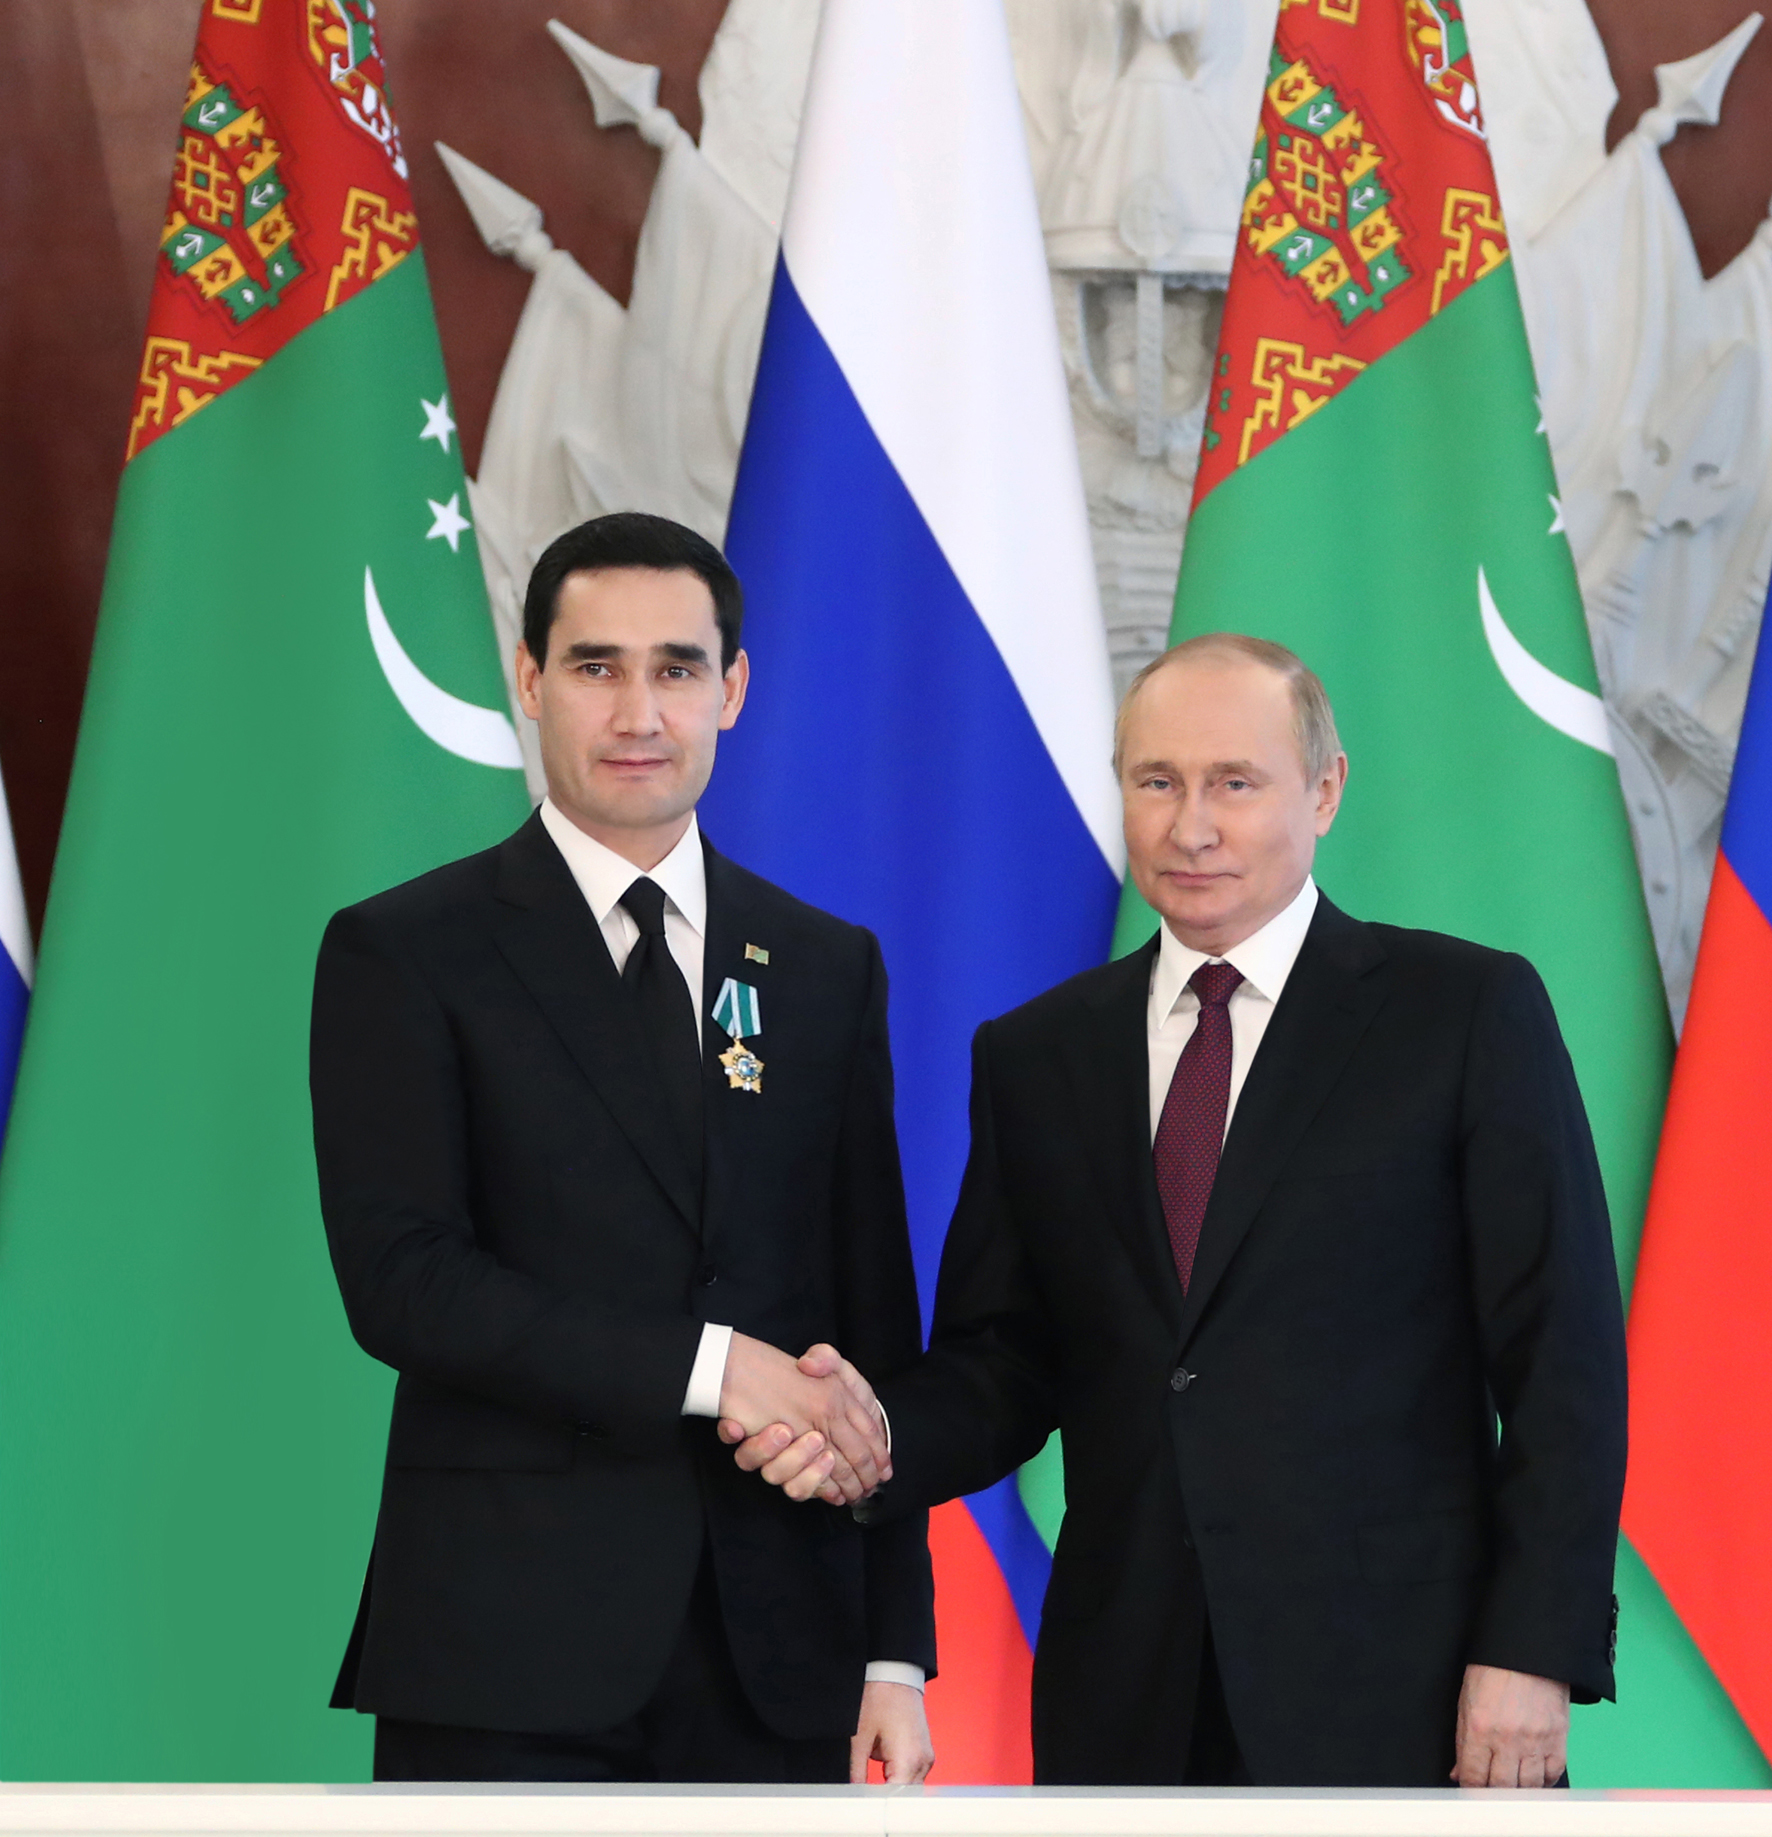 Turkmenistan and the Russian Federation confirmed their adherence to relations of deep strategic partnership